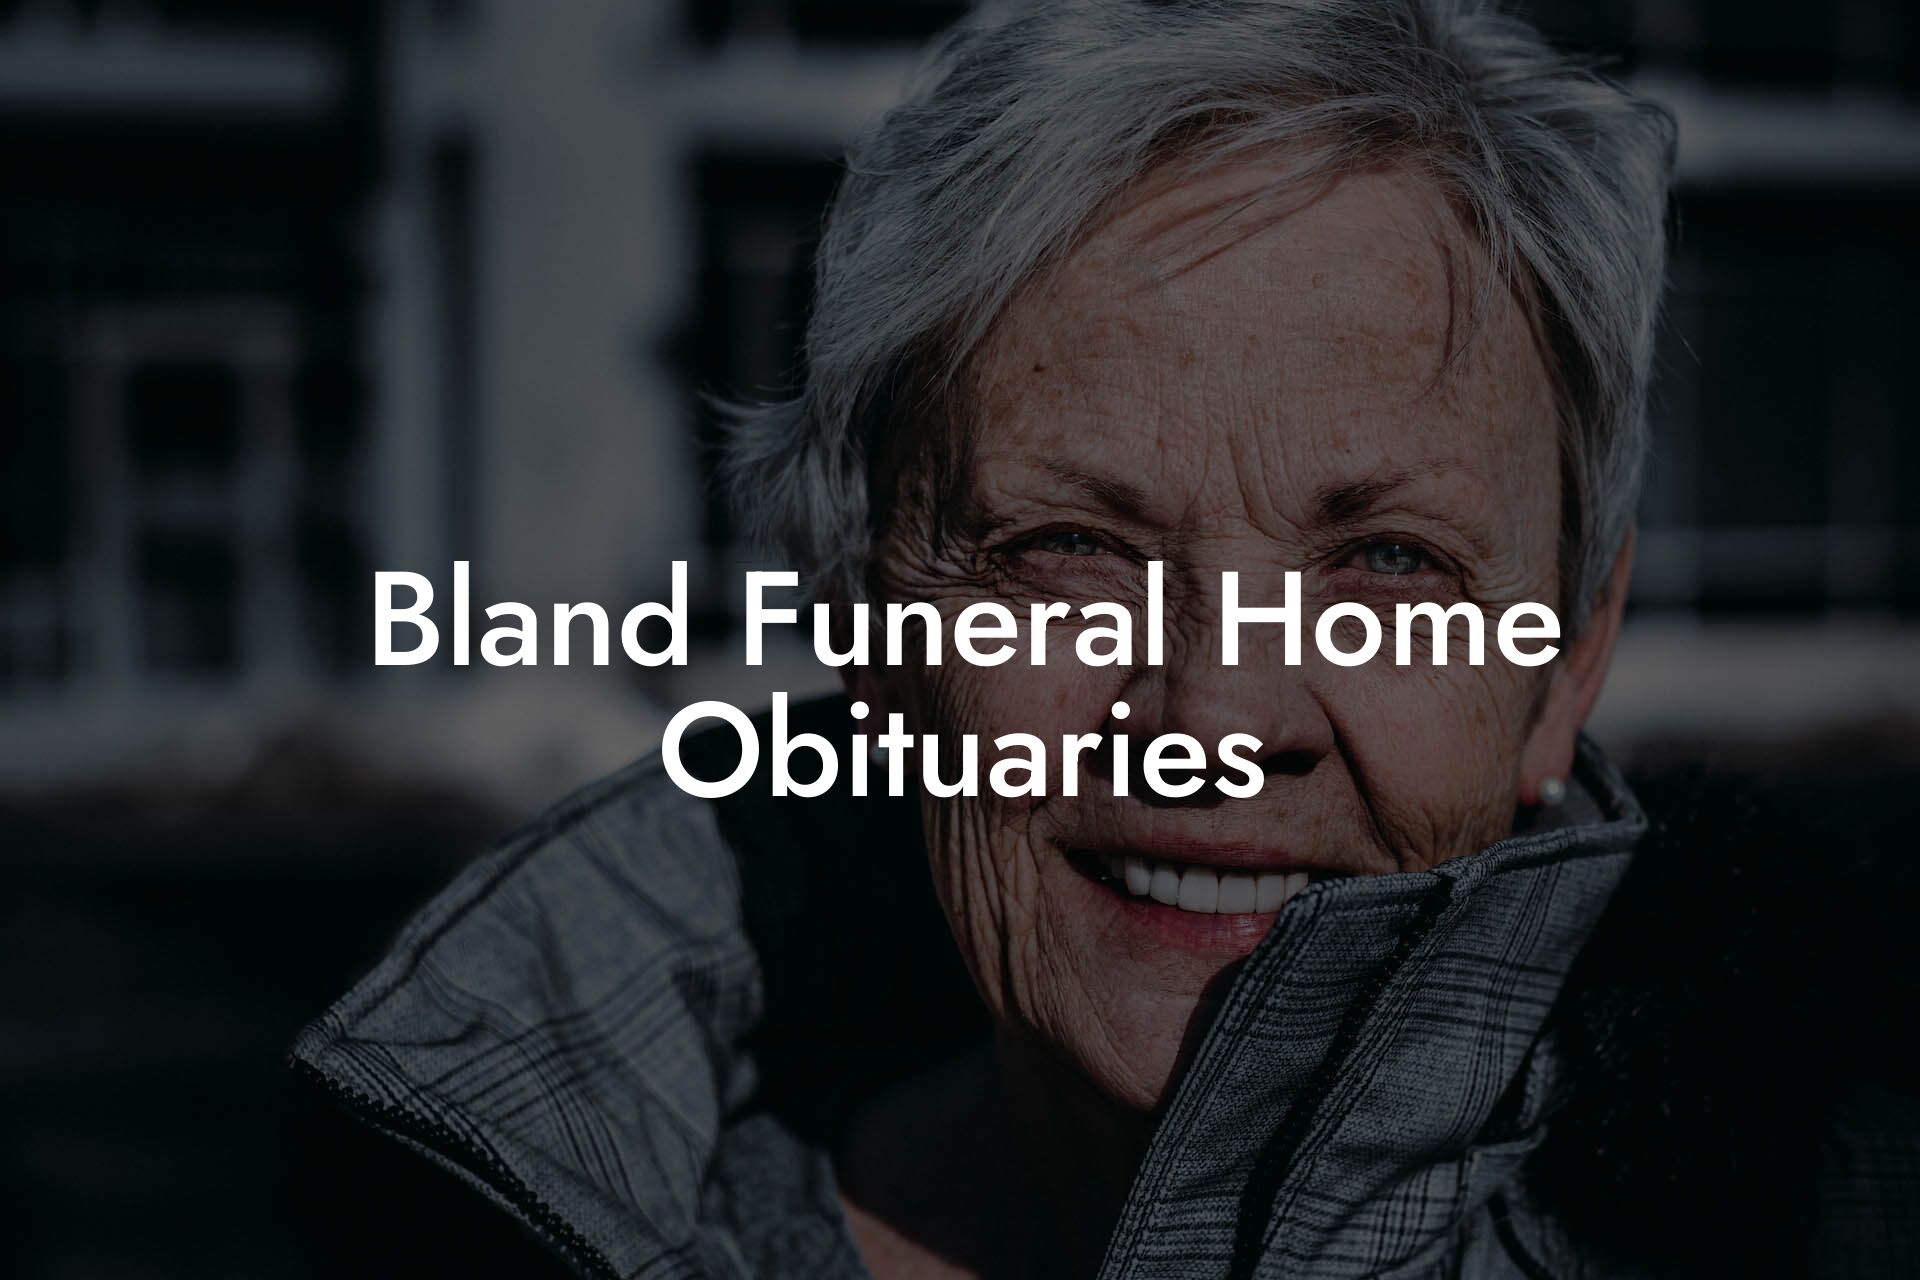 Bland Funeral Home Obituaries